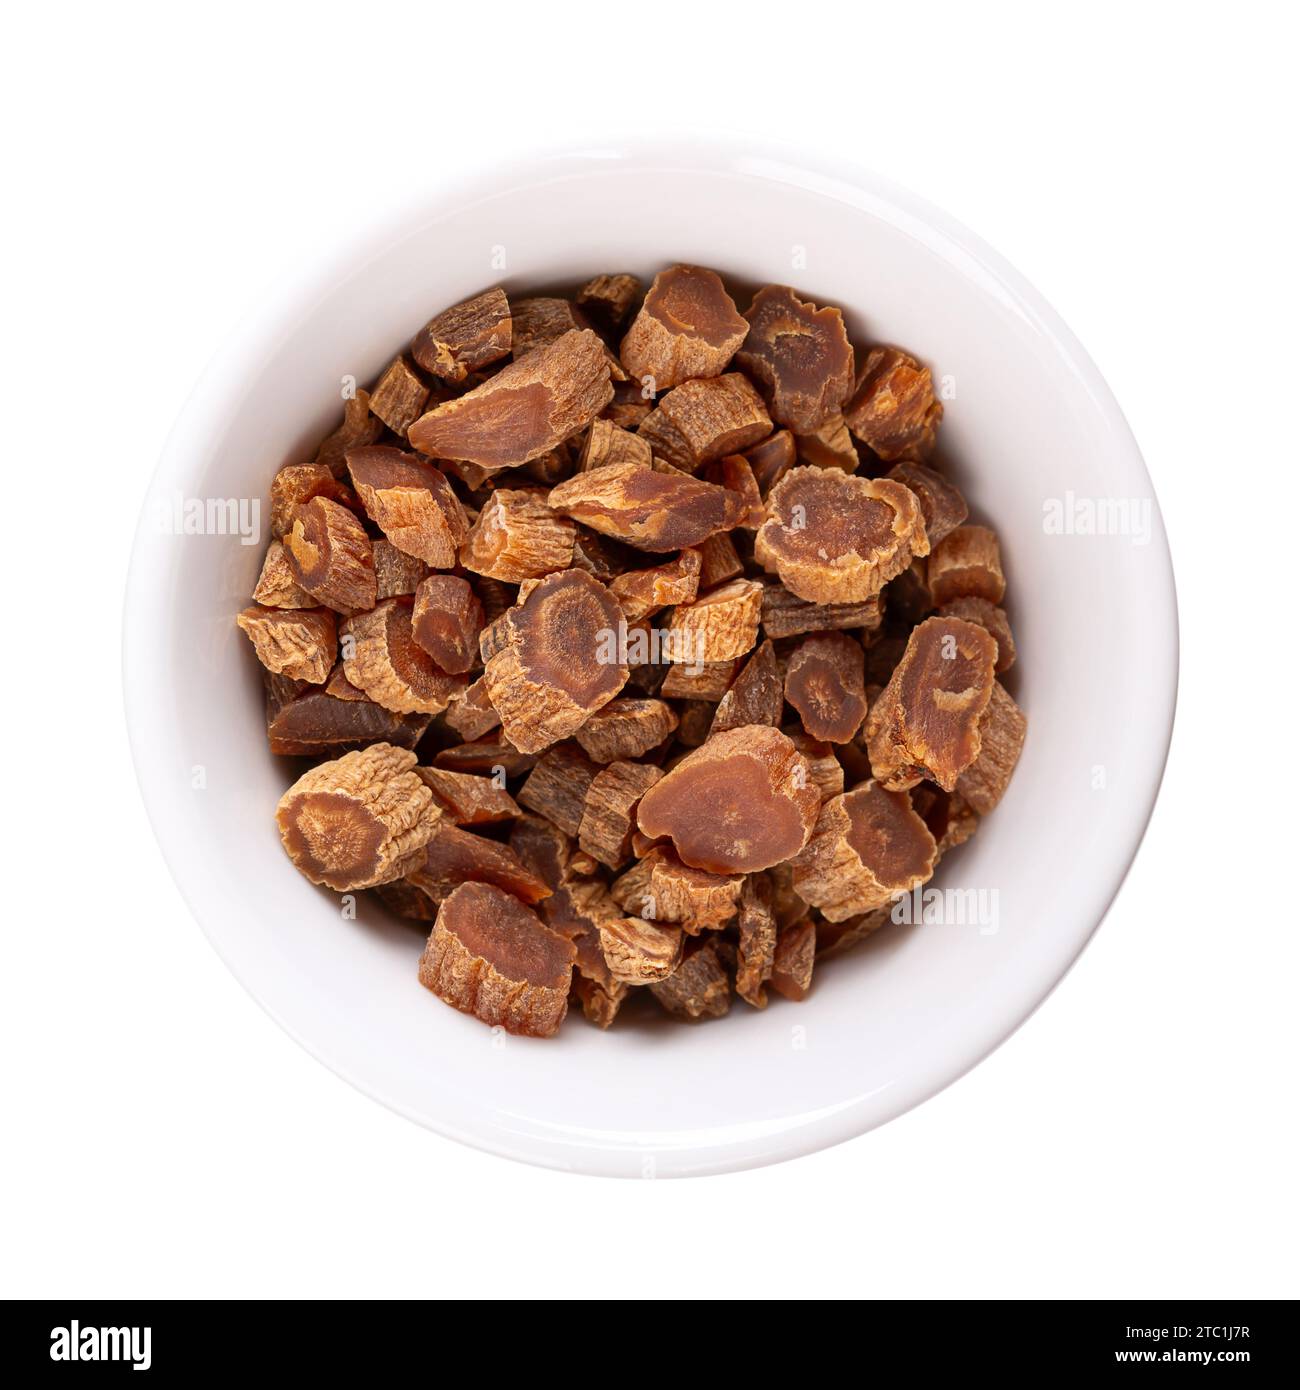 Dried cut red Korean ginseng root in a white bowl. Panax ginseng, also known as Asian or Chinese ginseng. Used as an herb in folk medicine. Stock Photo